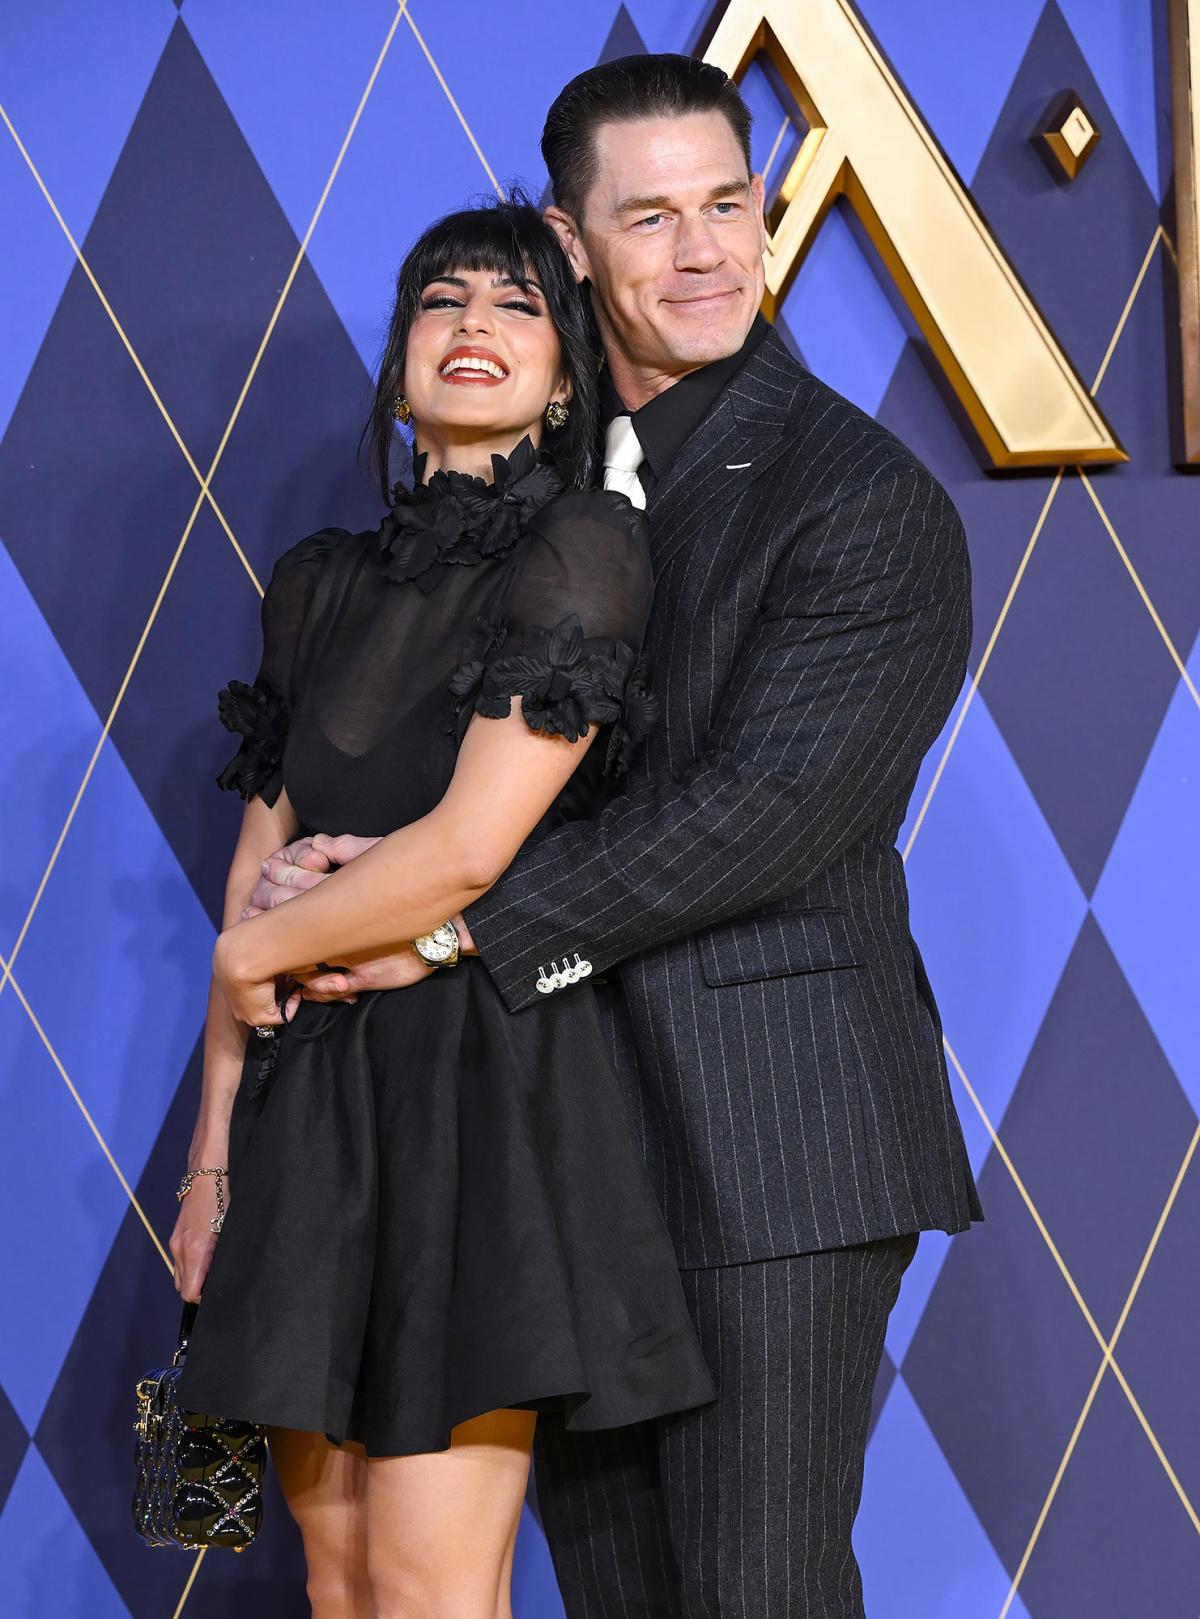 John Cena and Wife Shay Shariatzadeh Have a Rare Red Carpet Date Night ...